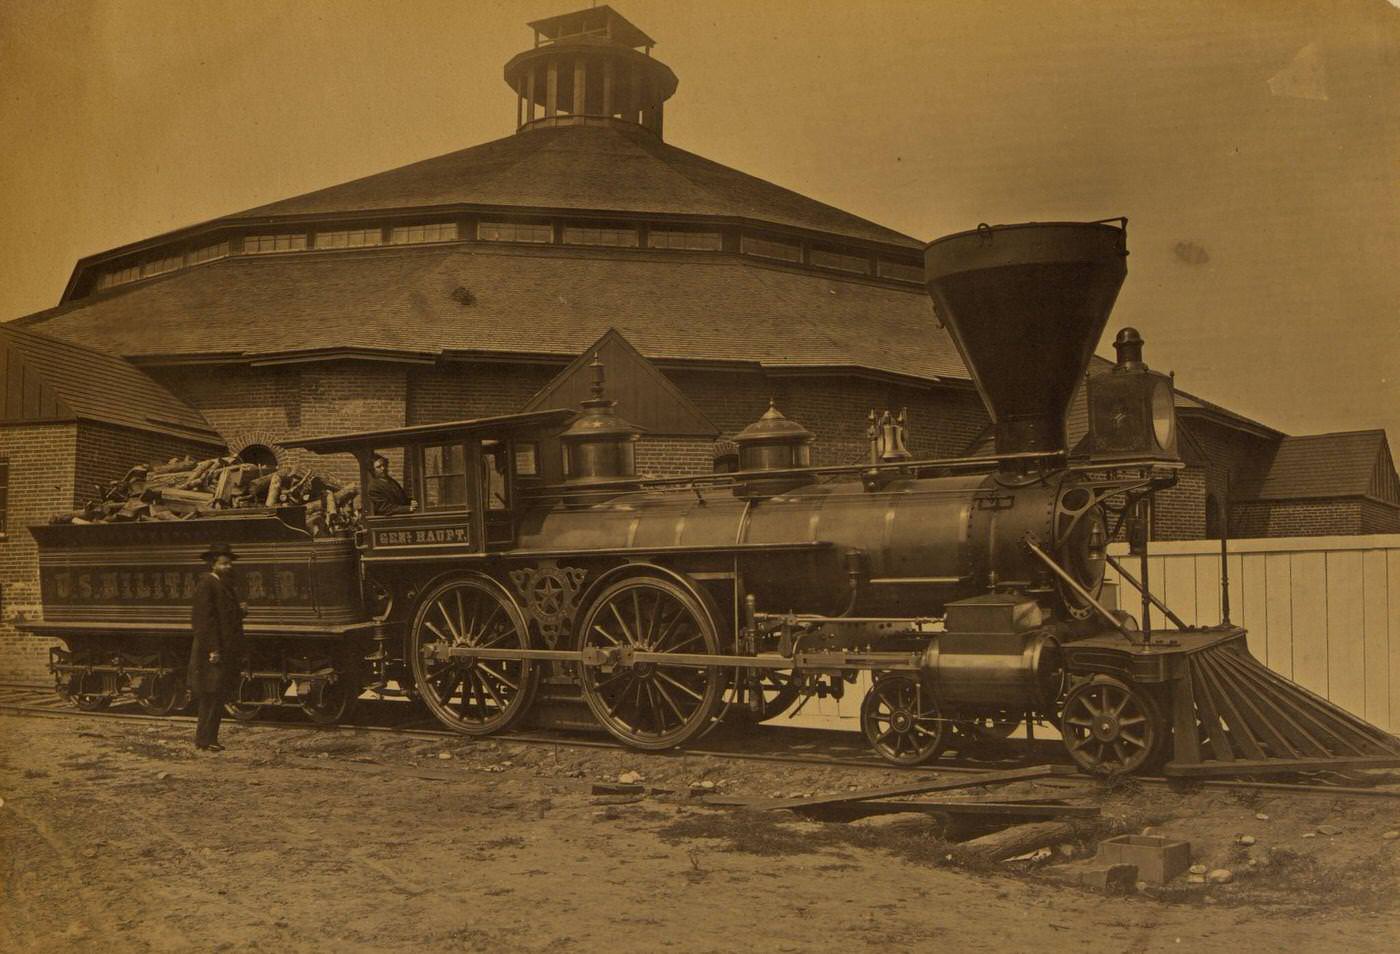 Wood burning locomotive "Gen. Haupt" named for Herman Haupt, chief of Construction and Transportation, in front of the roundhouse at the Alexandria station, 1863